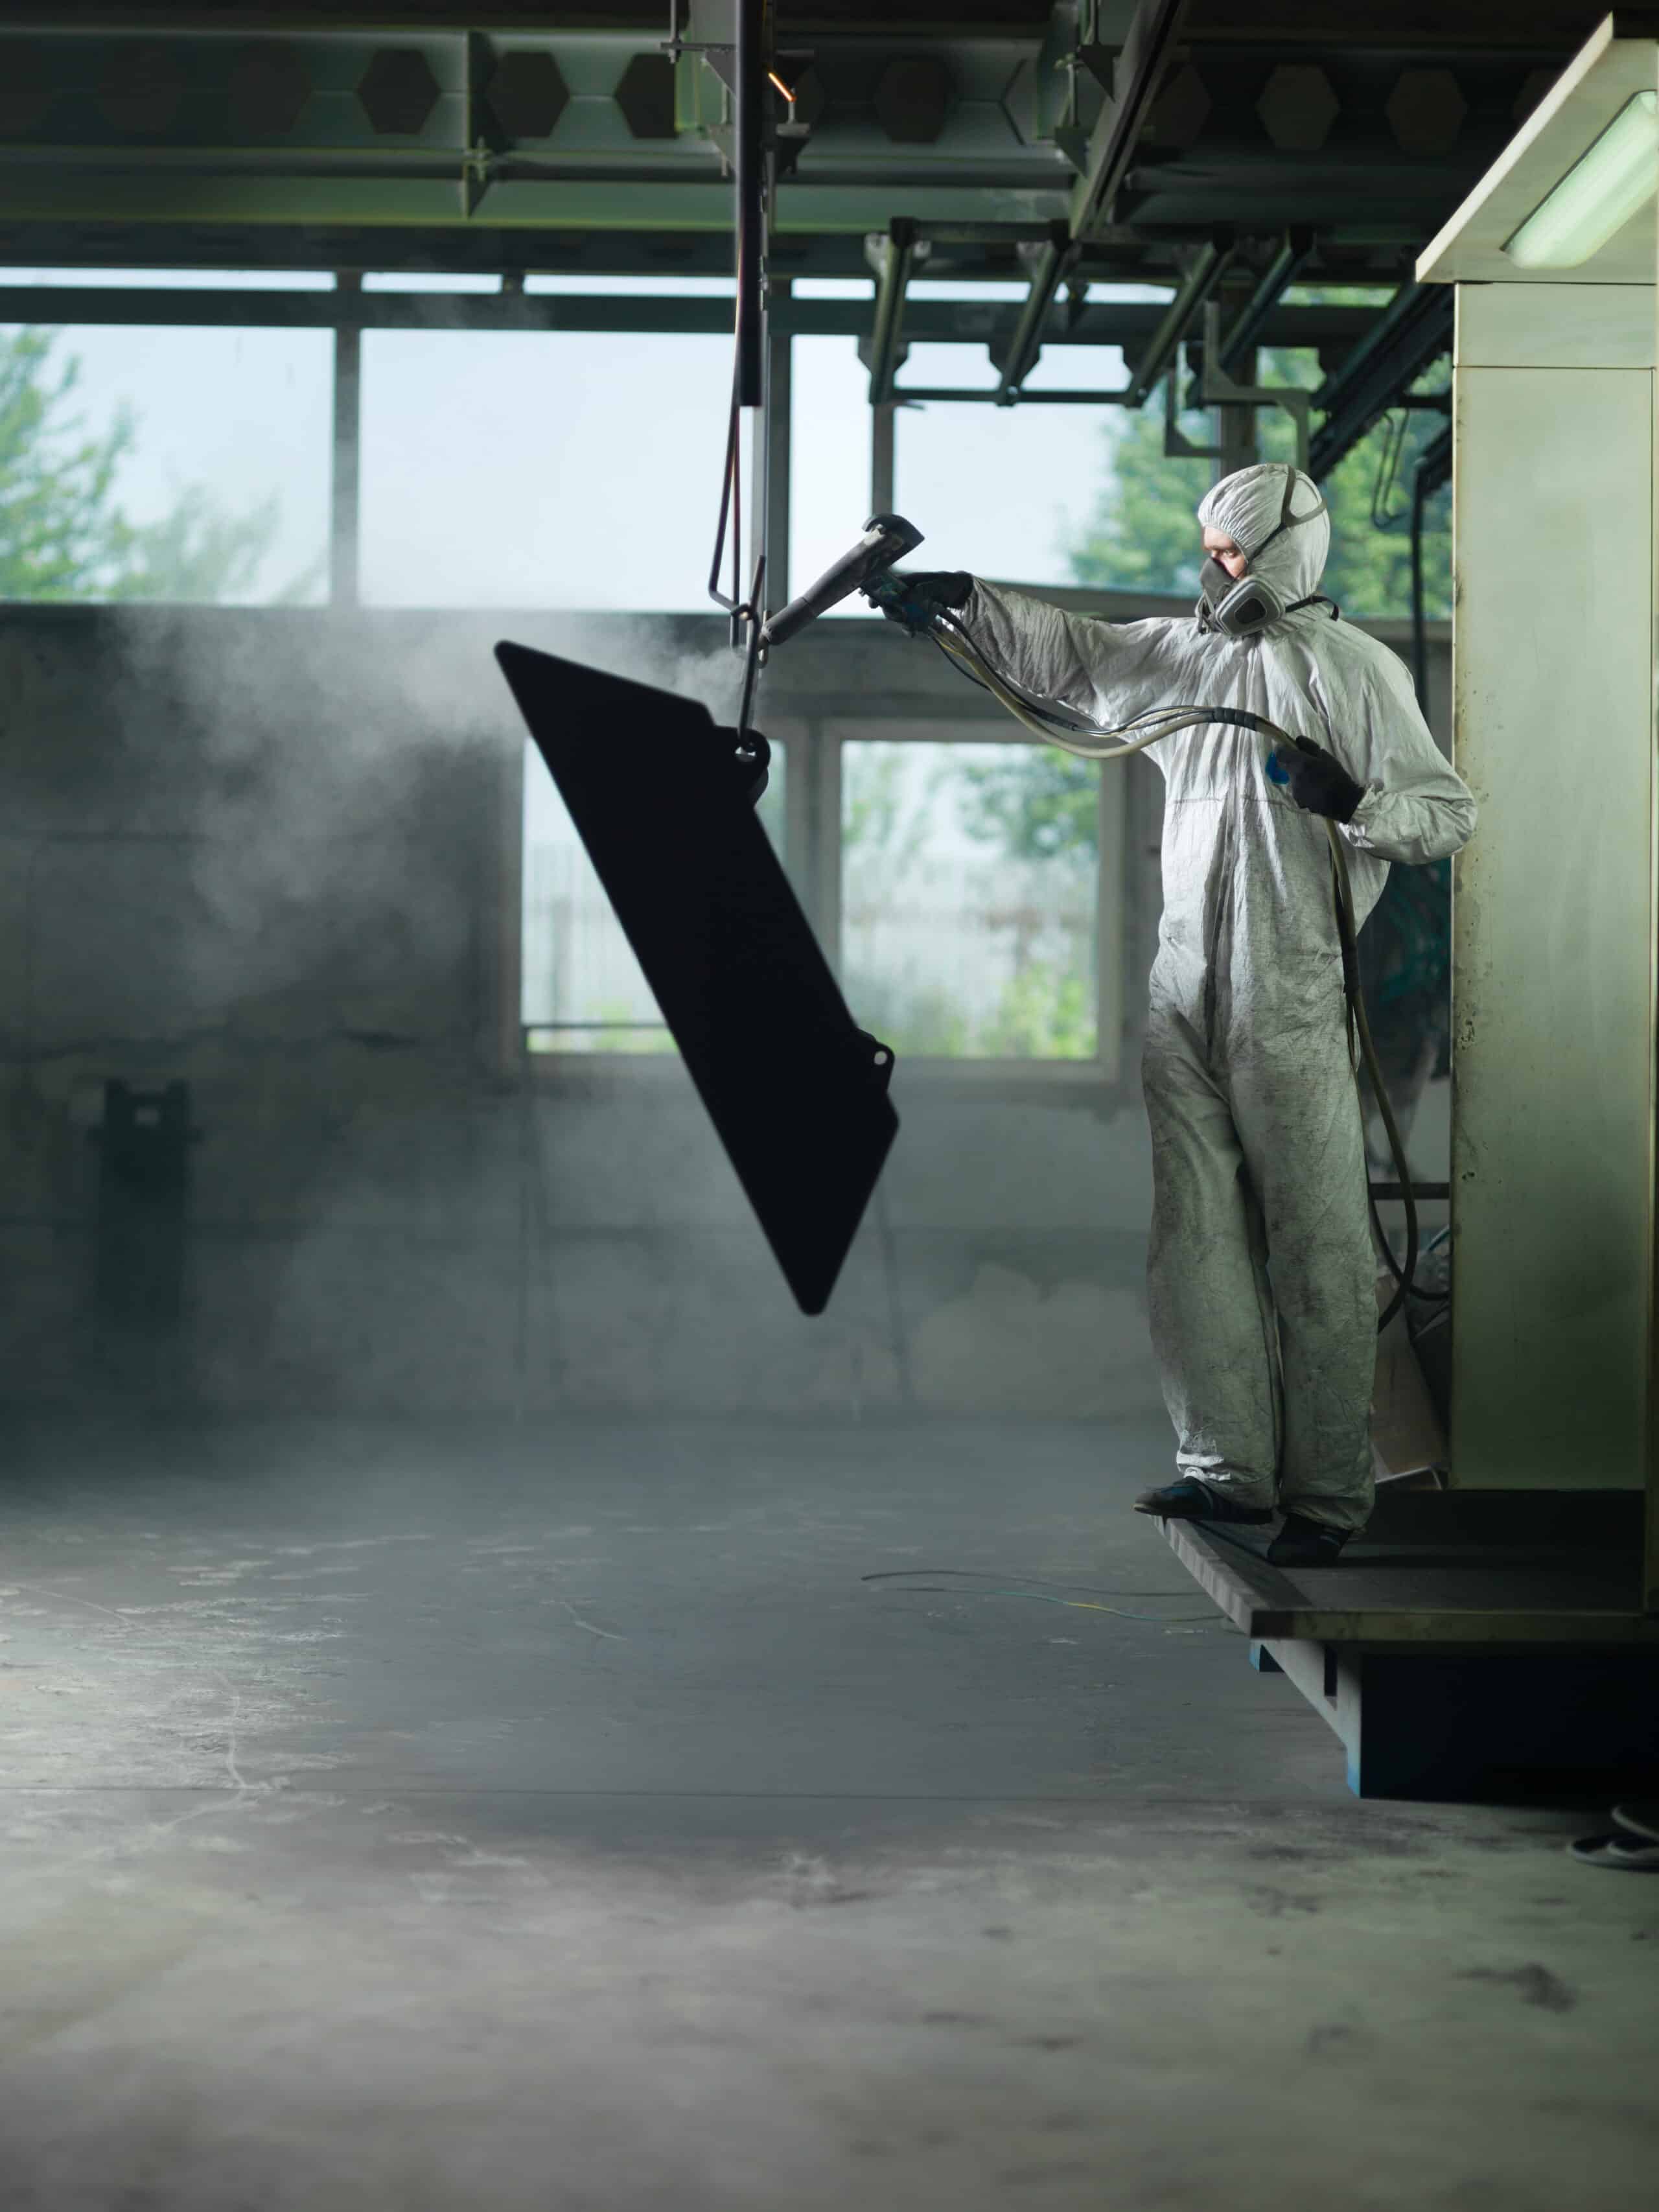 view of a worker wearing a full white protective suit and breathing mask, sand blasting a metal crate hung from a metal beam in the ceiling of an industrial hall